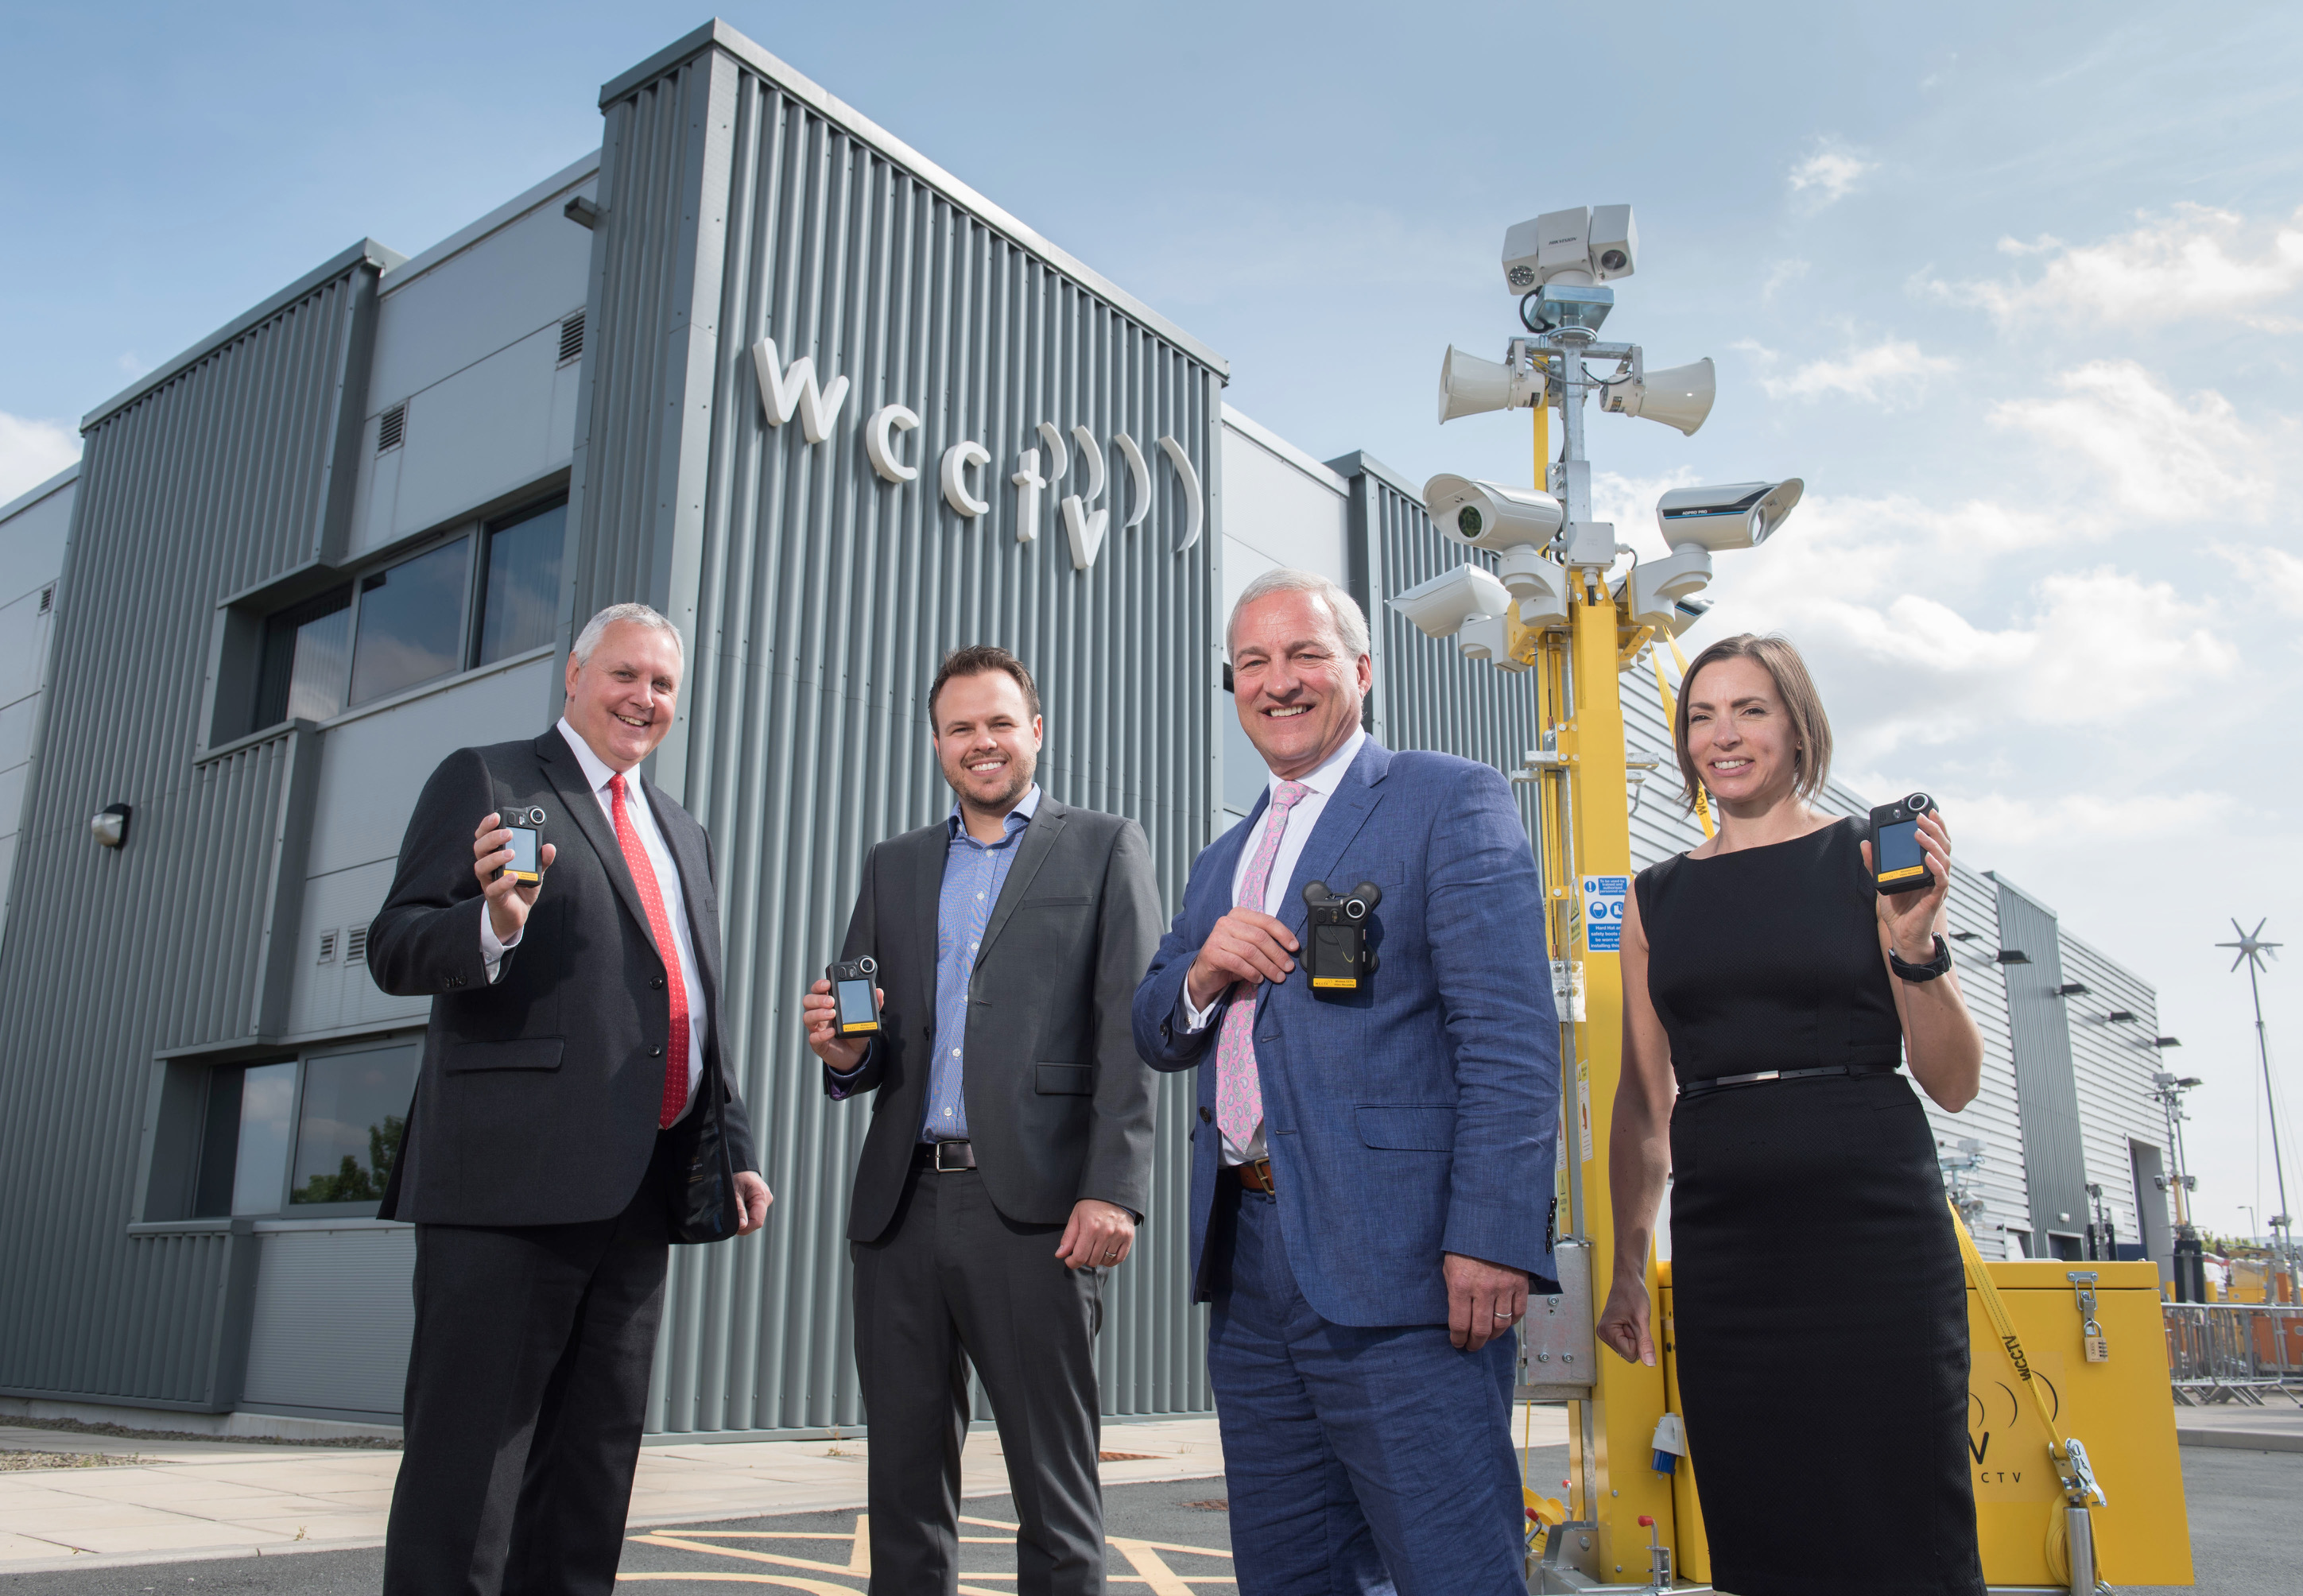 Image: WCCTV Sets Sights On Growth With HSBC Funding